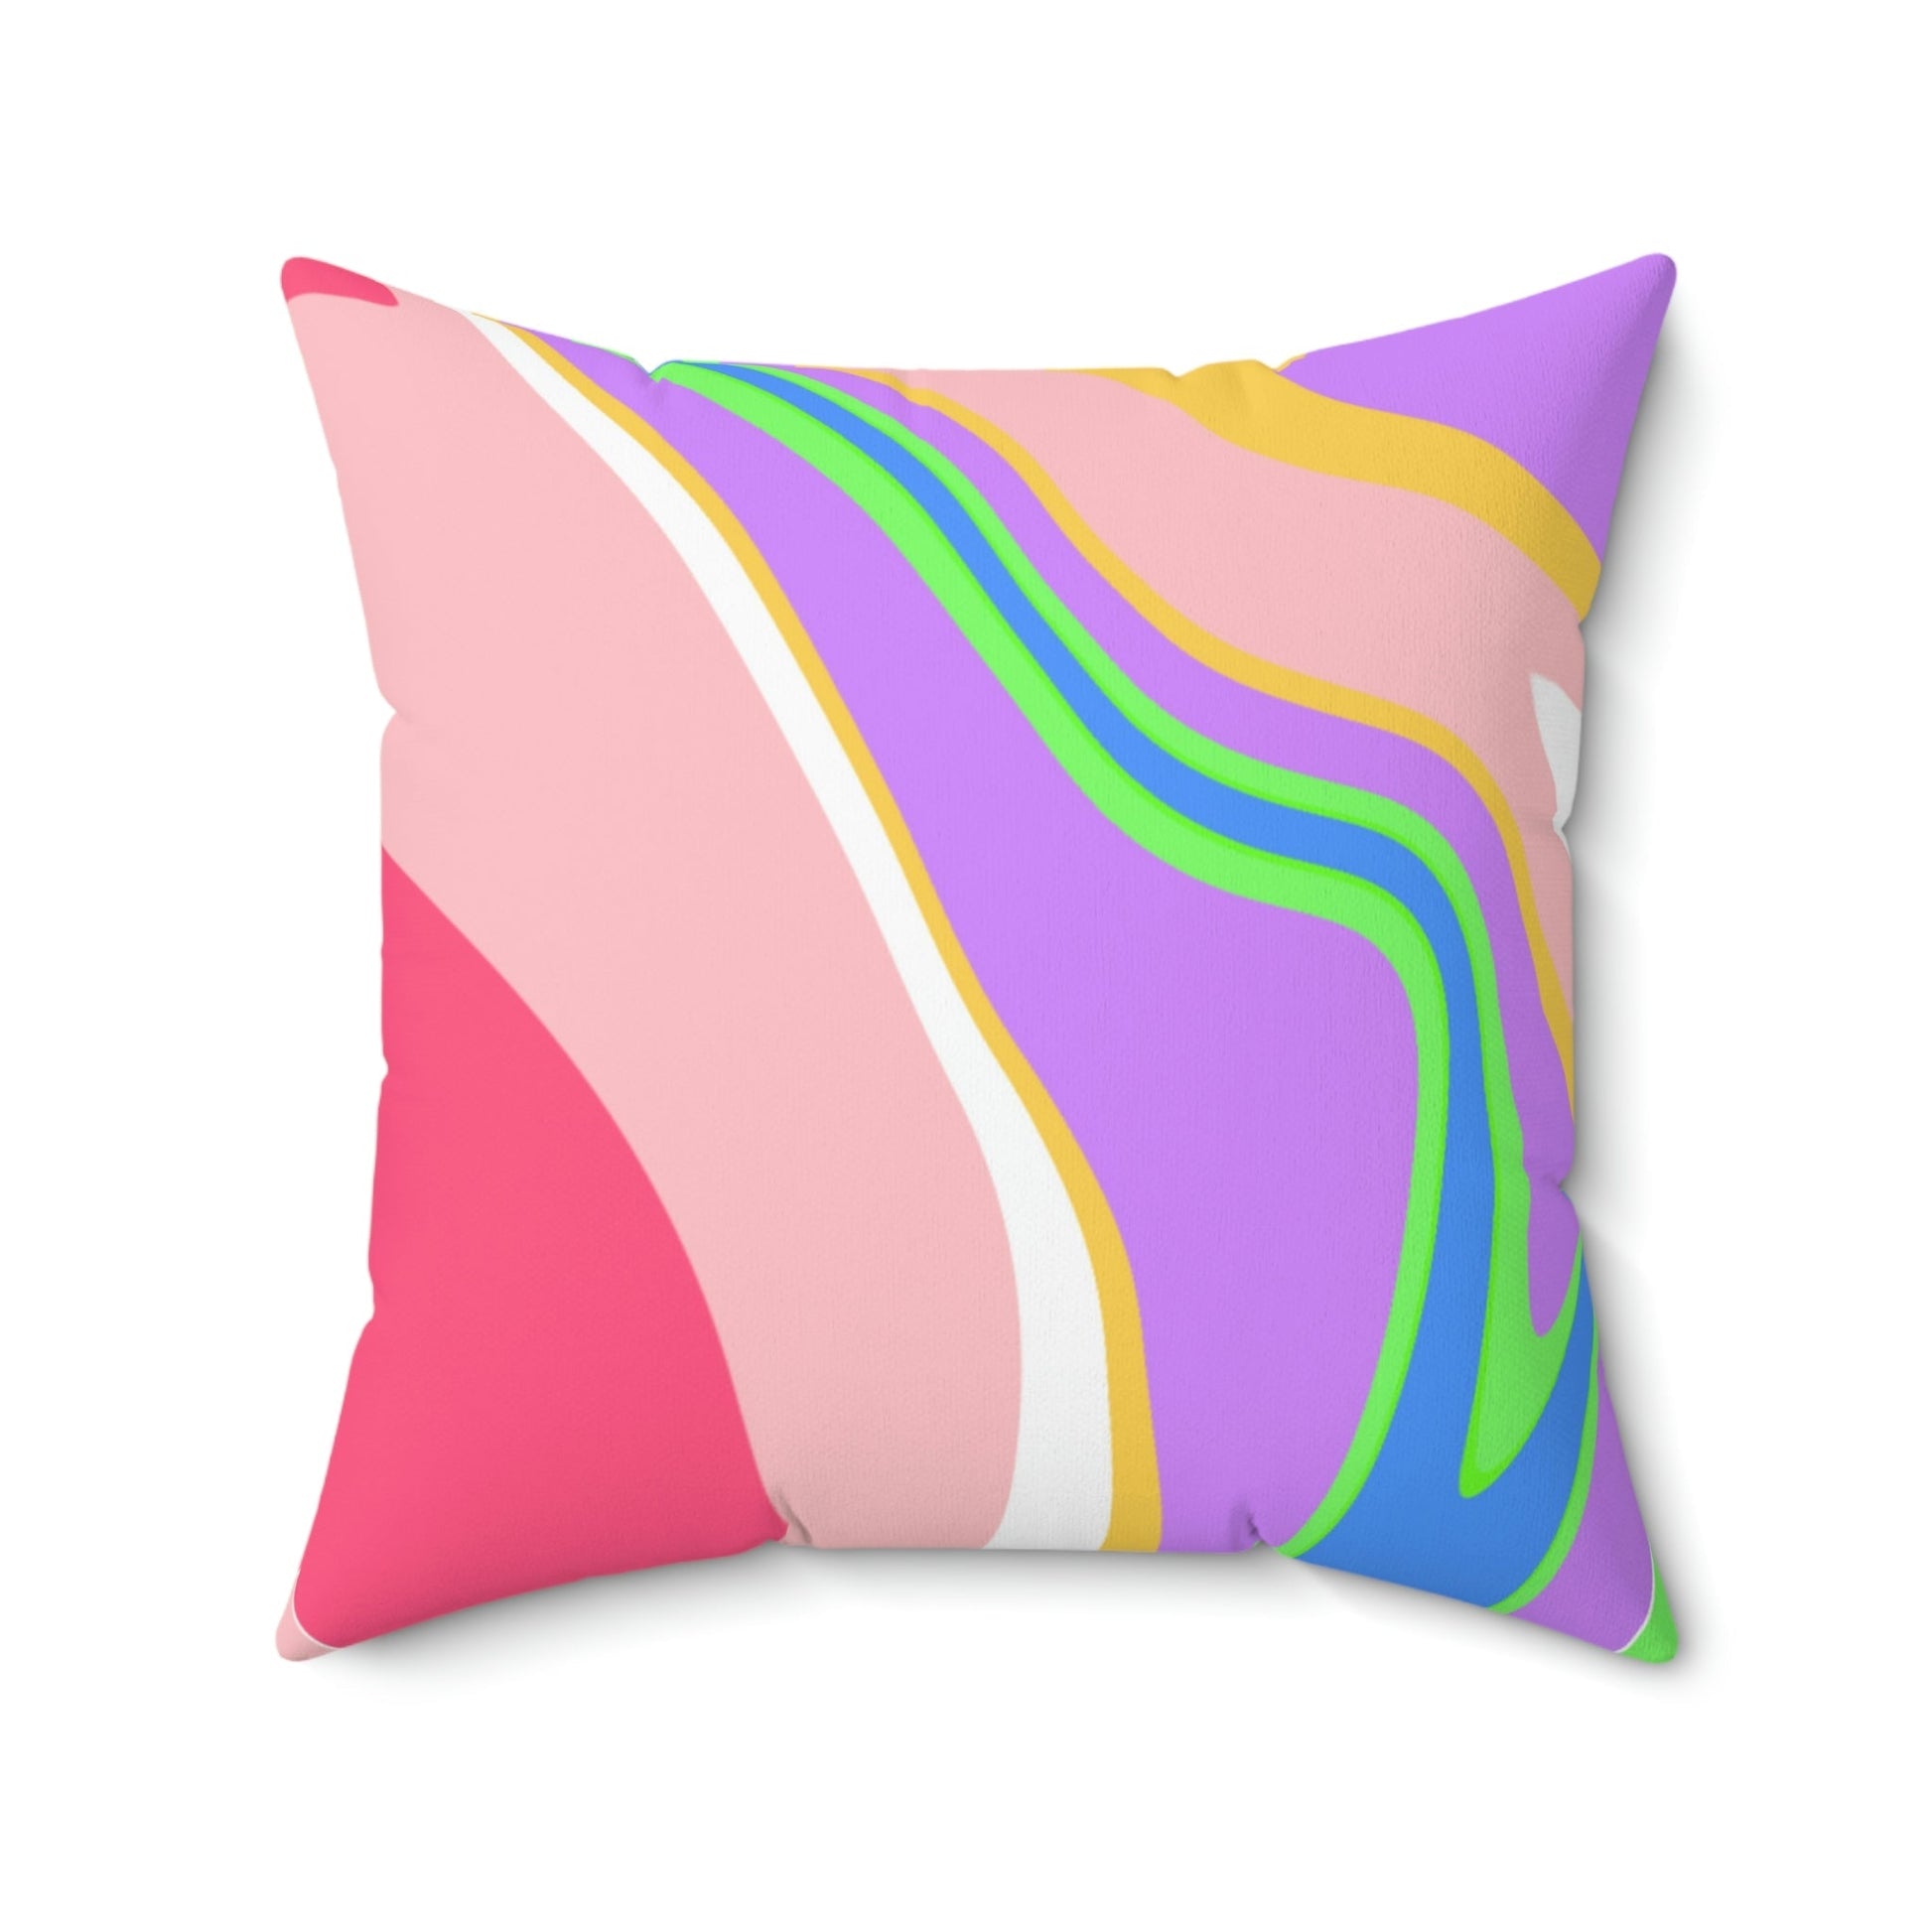 Vibrant Candy Swirl Square Pillow Home Decor Pink Sweetheart